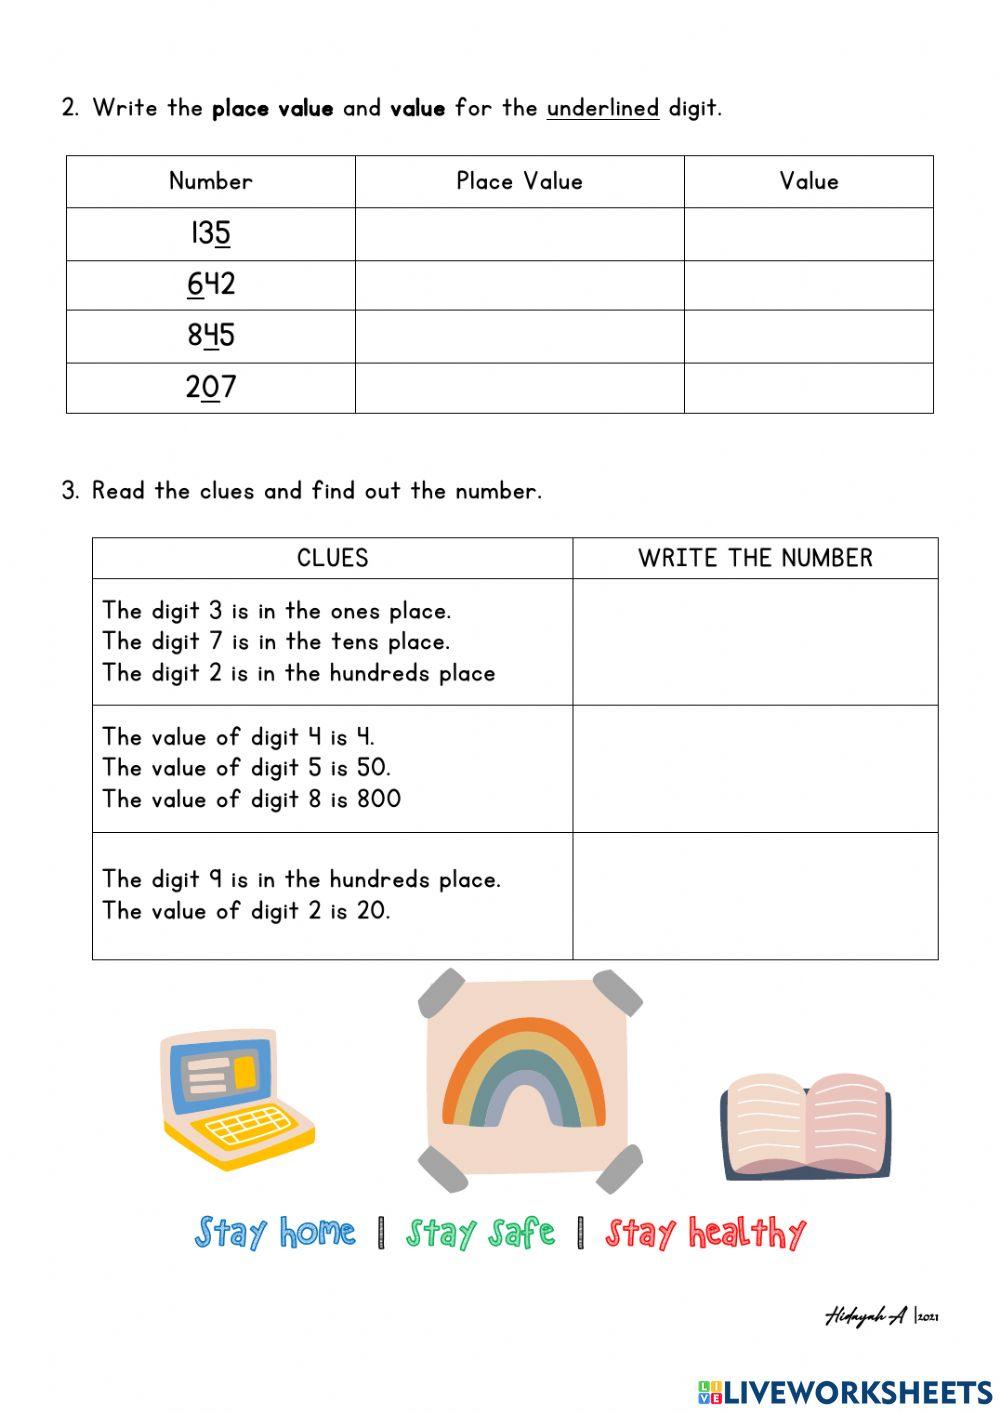 Place value and value